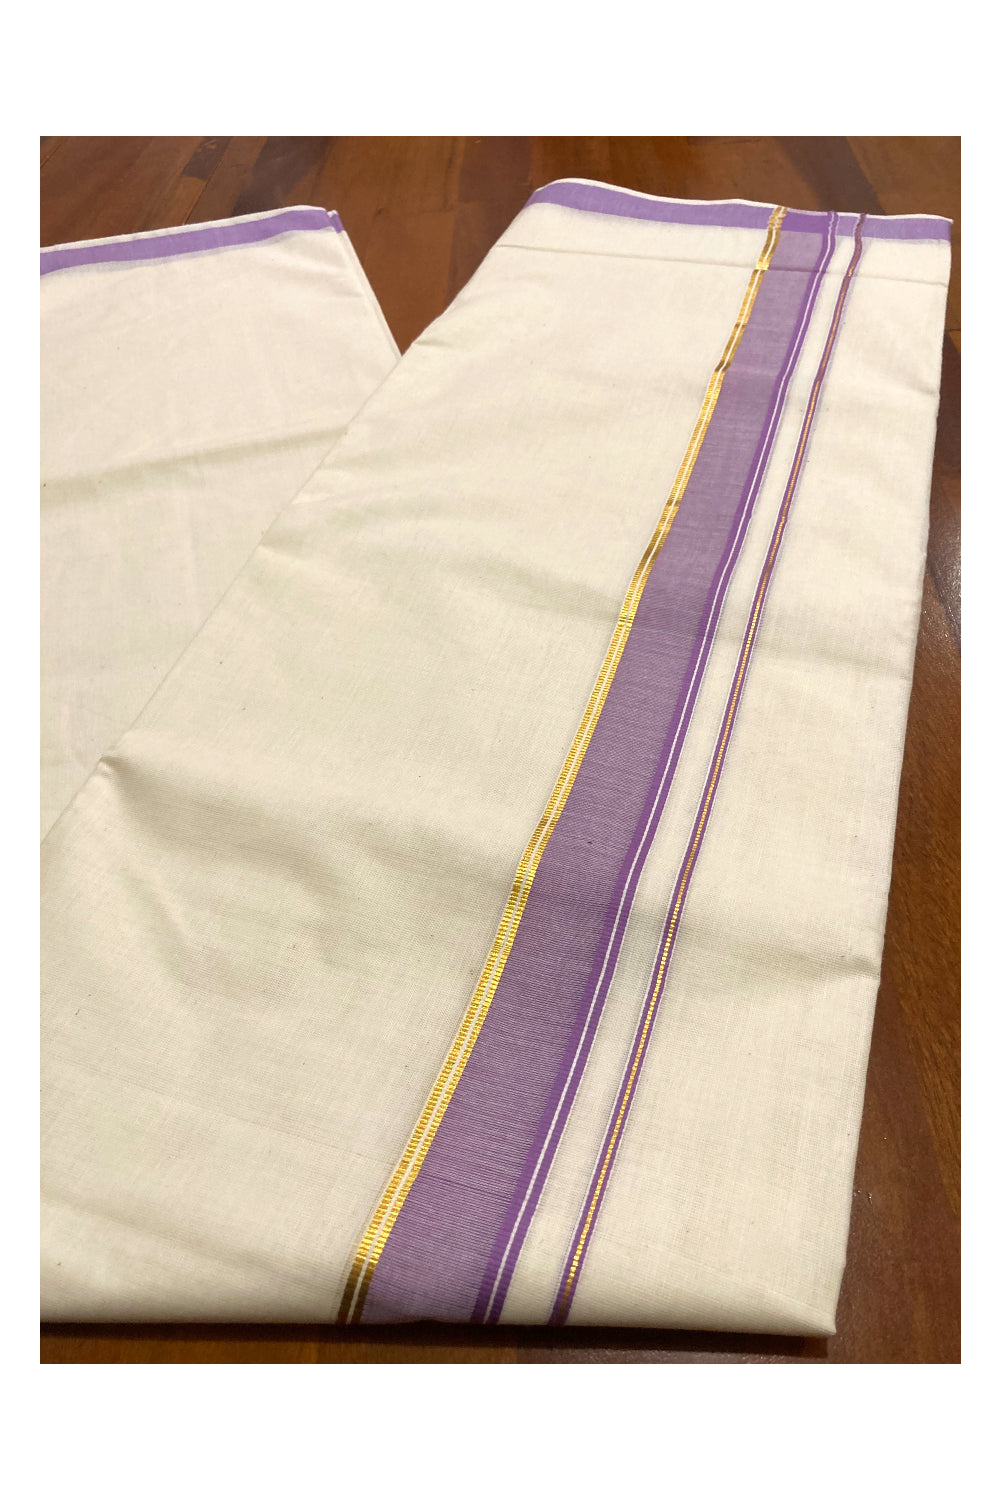 Off White Pure Cotton Double Mundu with Kasavu and Violet Border (South Indian Kerala Dhoti)